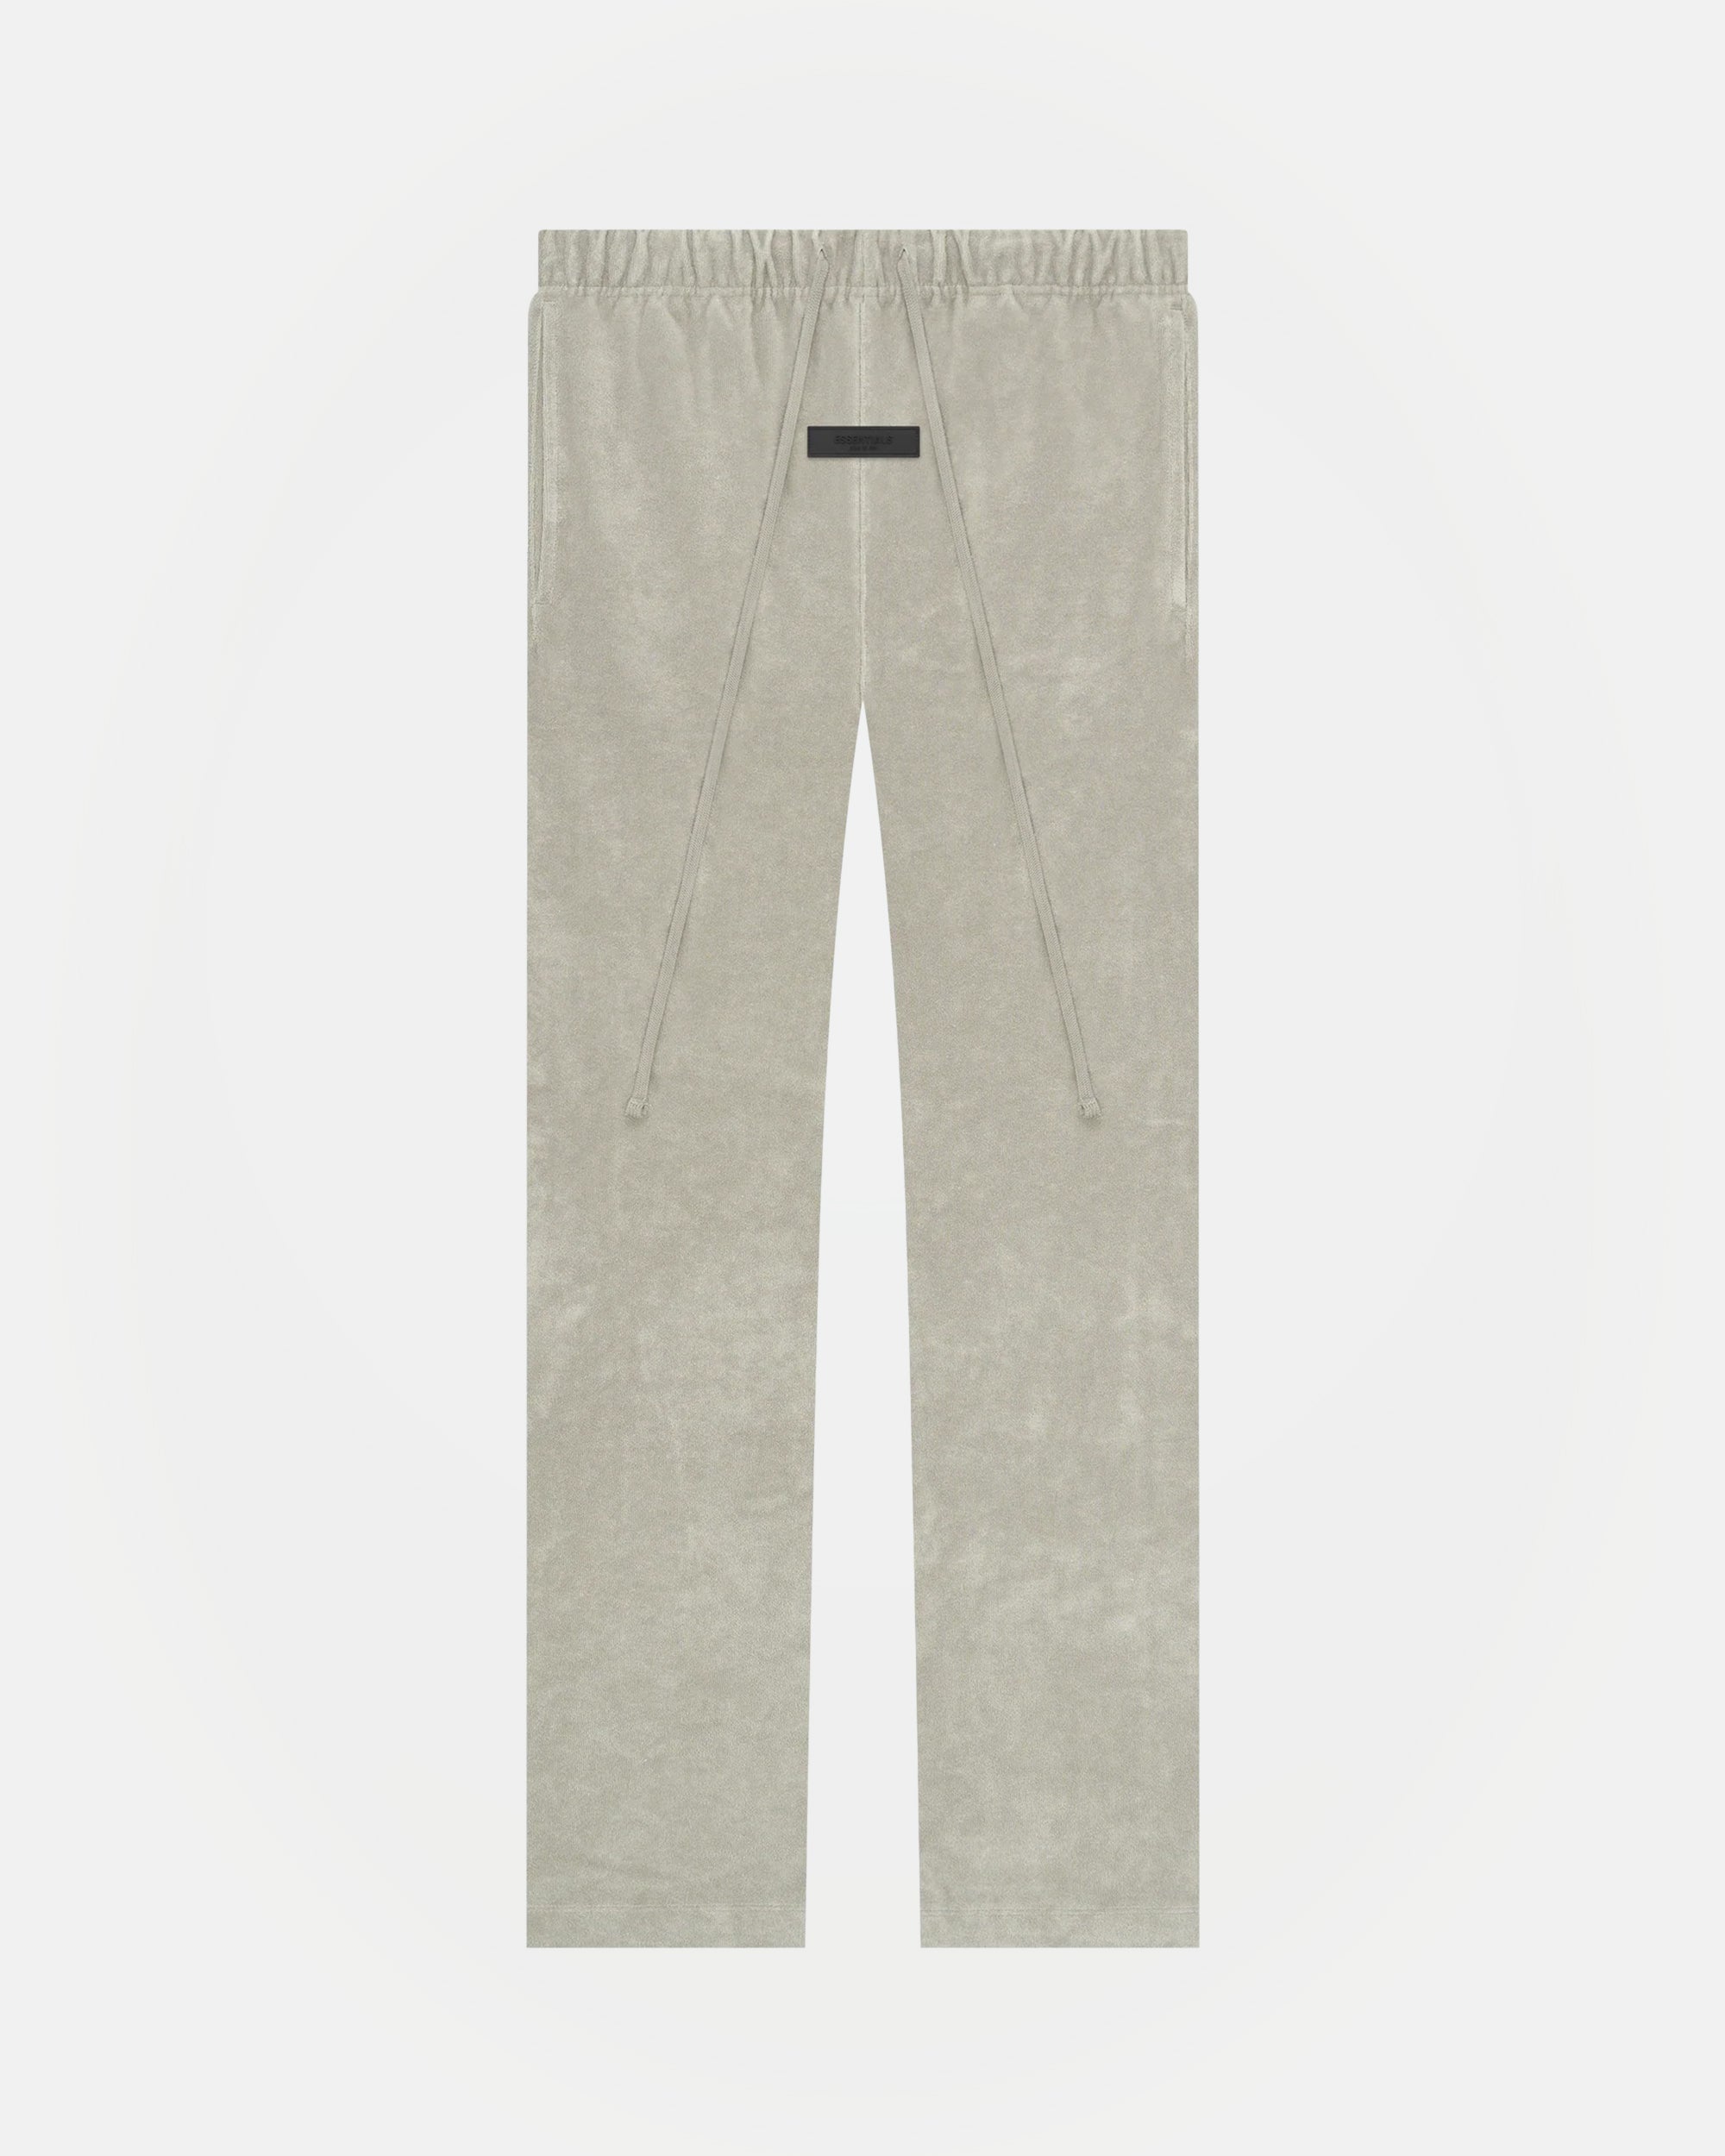 Fear of God Essentials Light Oatmeal Relaxed Sweatpants